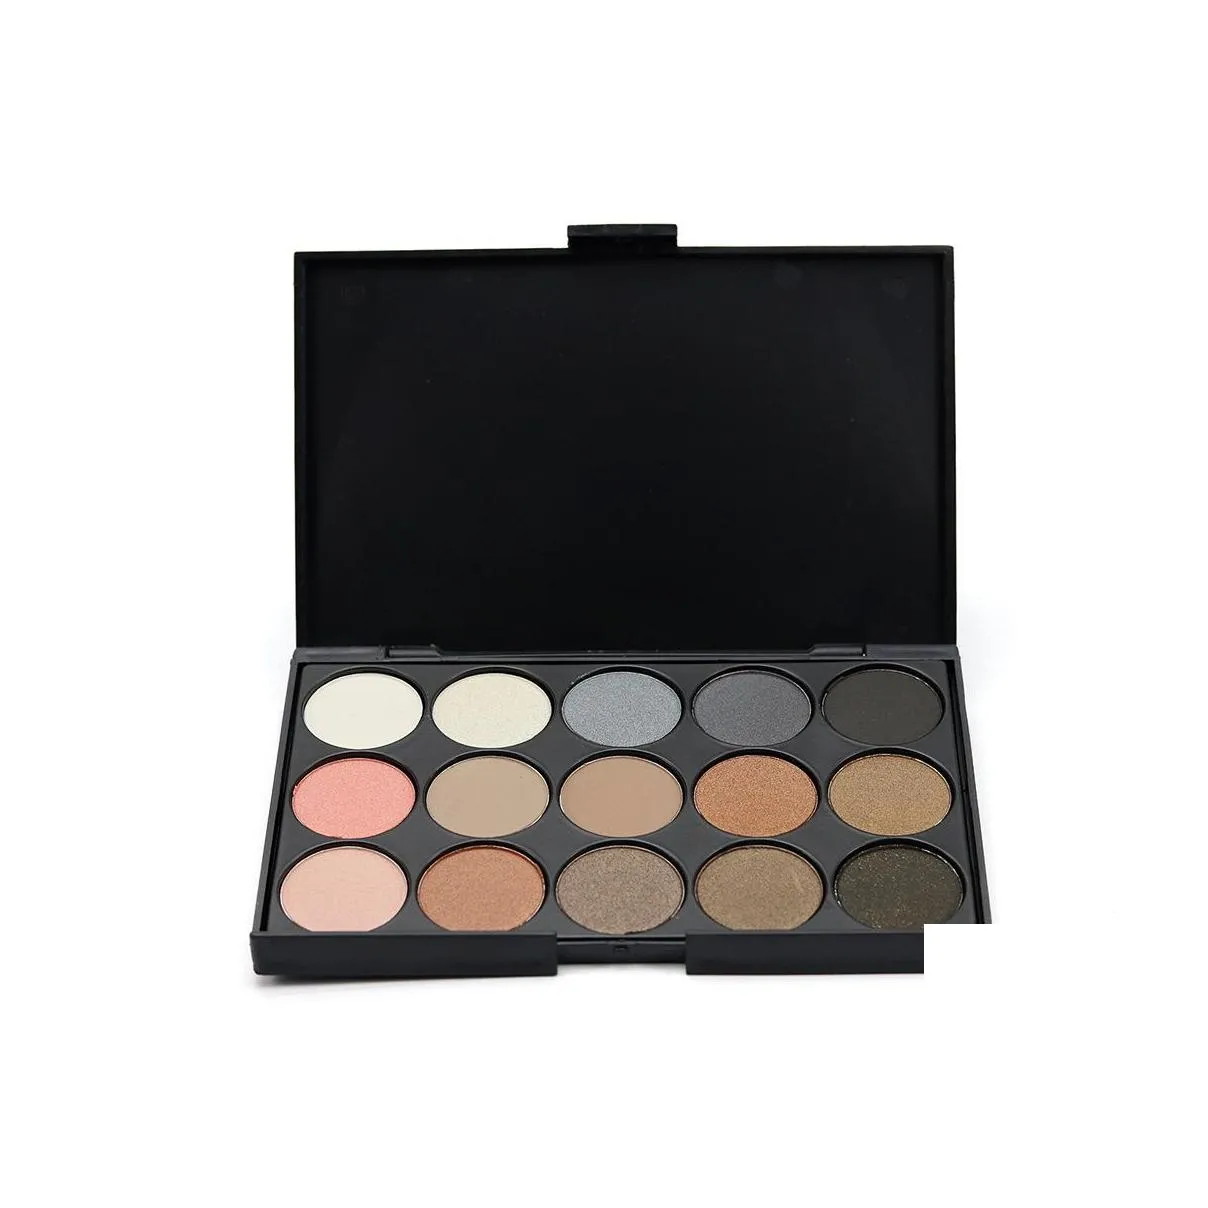 eye makeup look eyeshadow palette 15 colors matte and shimmer eyeshadow nude earth color powder make up eyes shadow